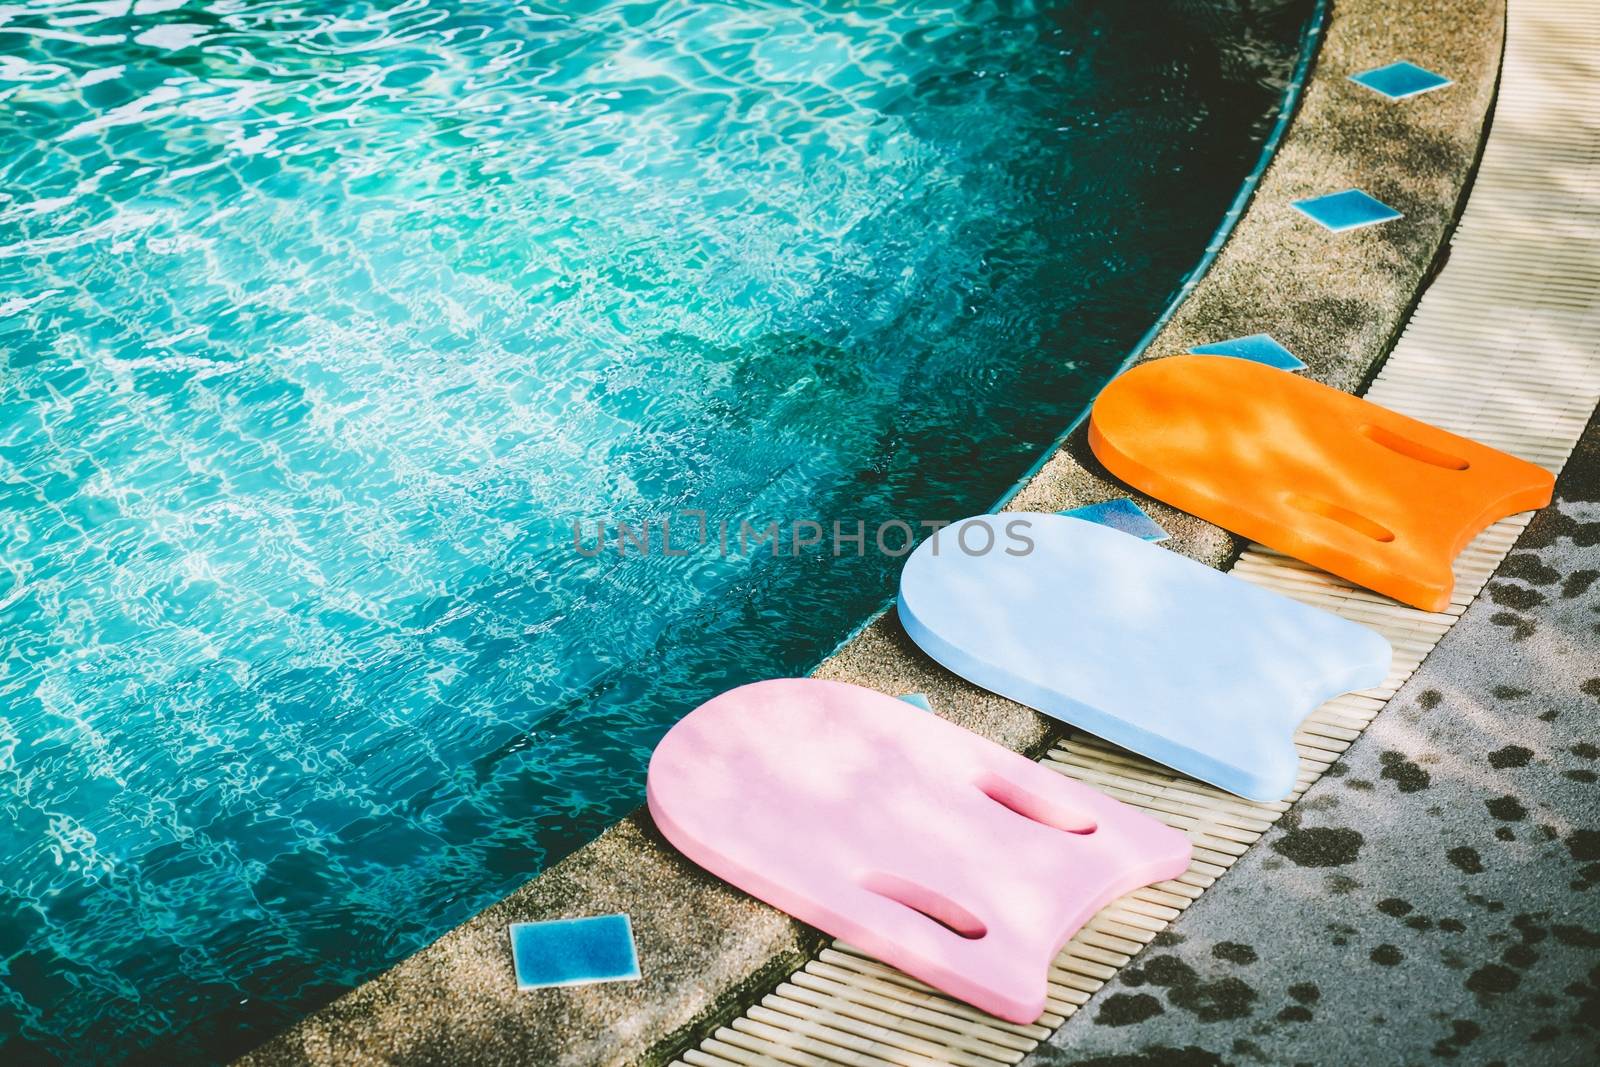 Kickboard equipment provided in a refreshing blue swimming pool. by boytaro1428@gmail.com